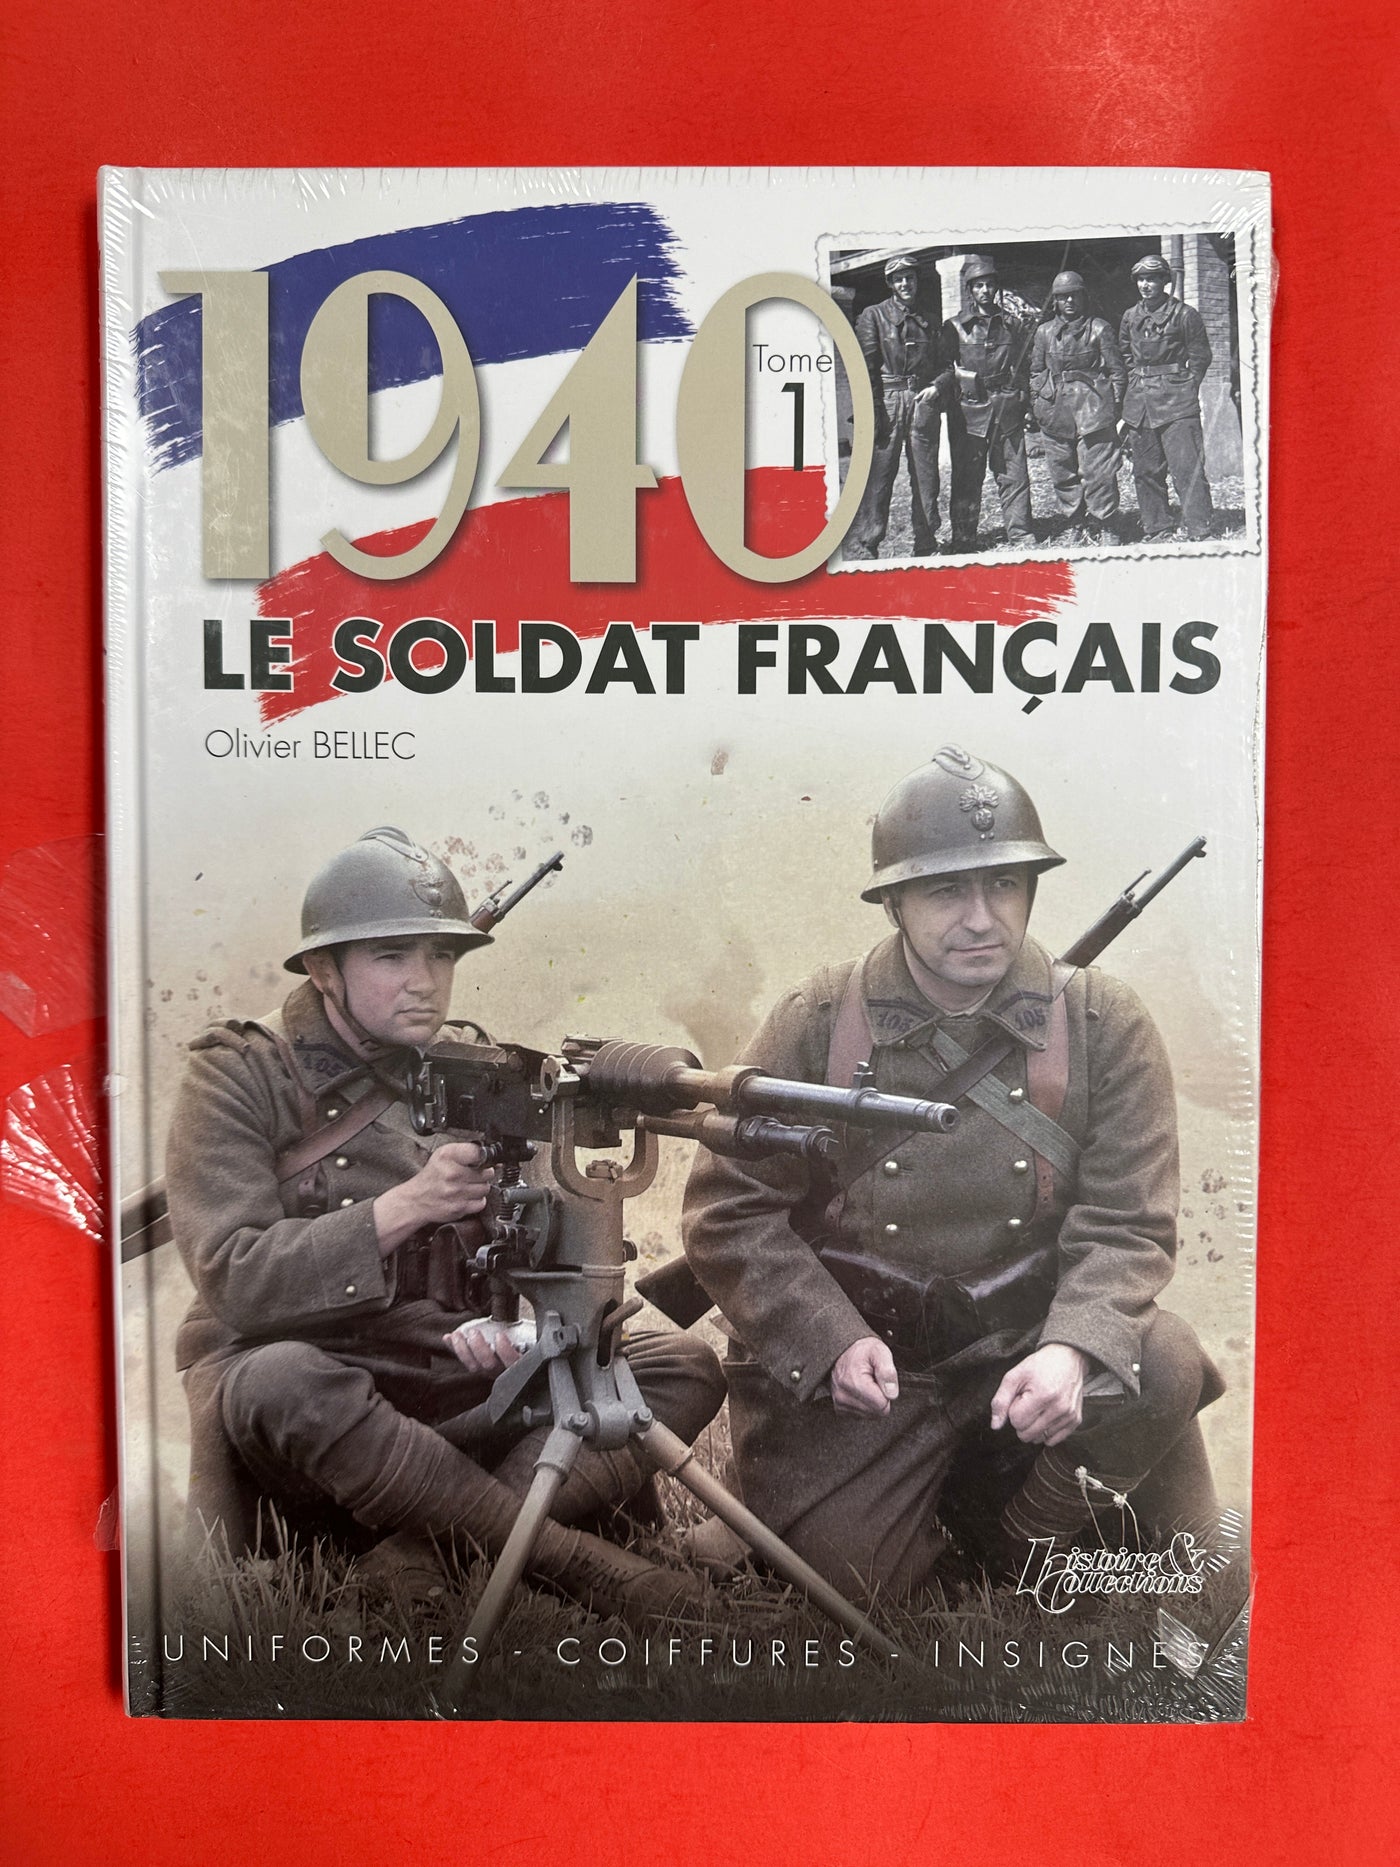 1940 Le Soldat Francais Tome 1: Equipement Amement Matieres (French Edition) Hardcover OUT OF PRINT